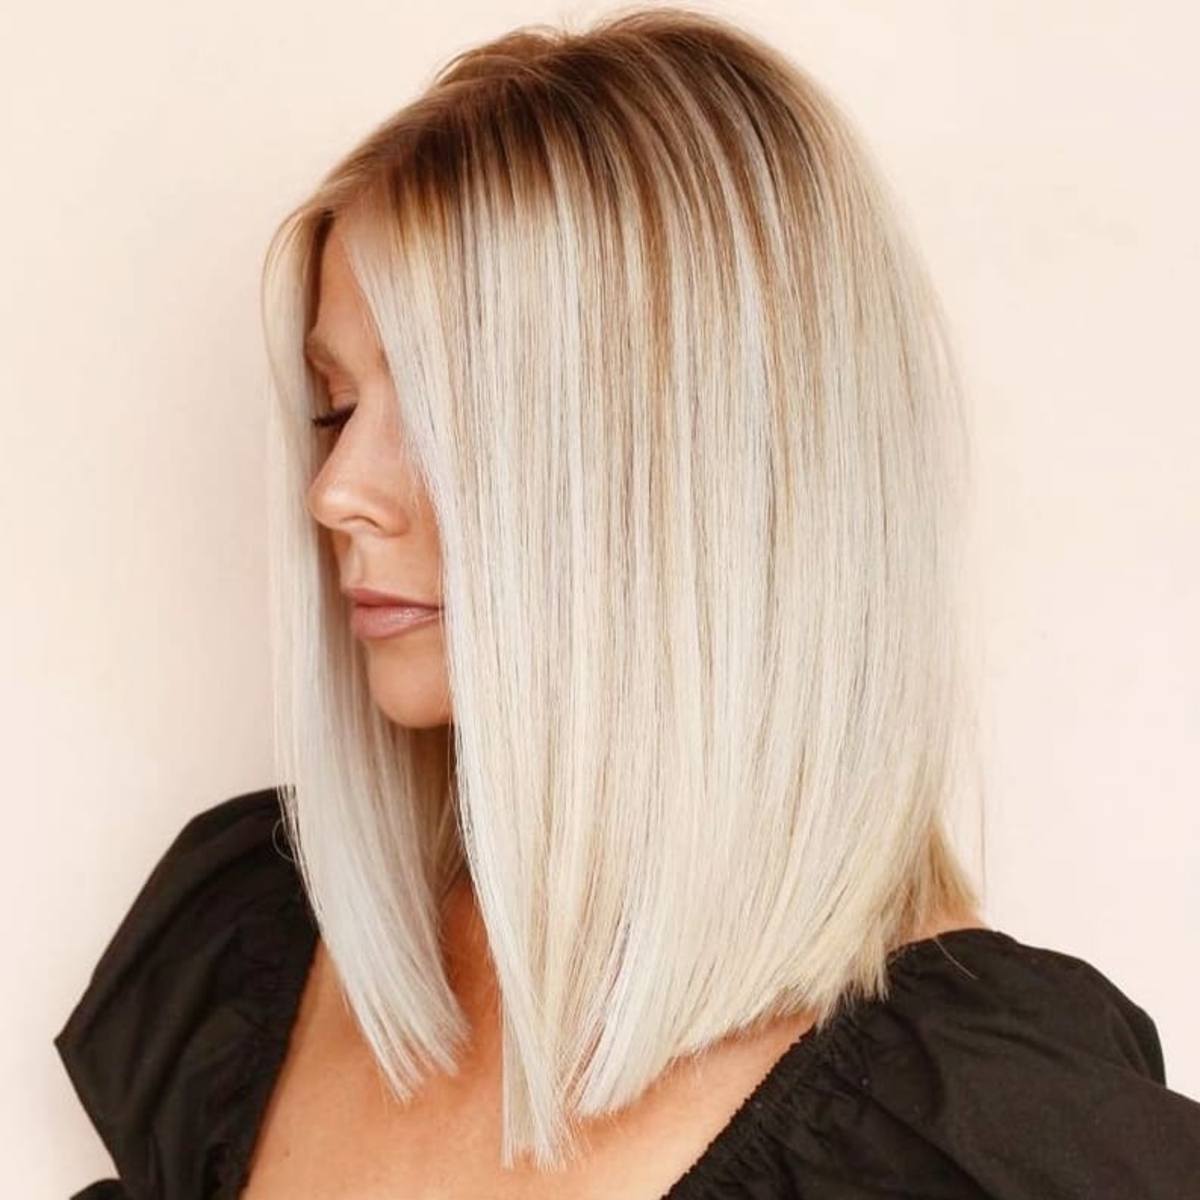 Lob on straight blonde hair with dark roots